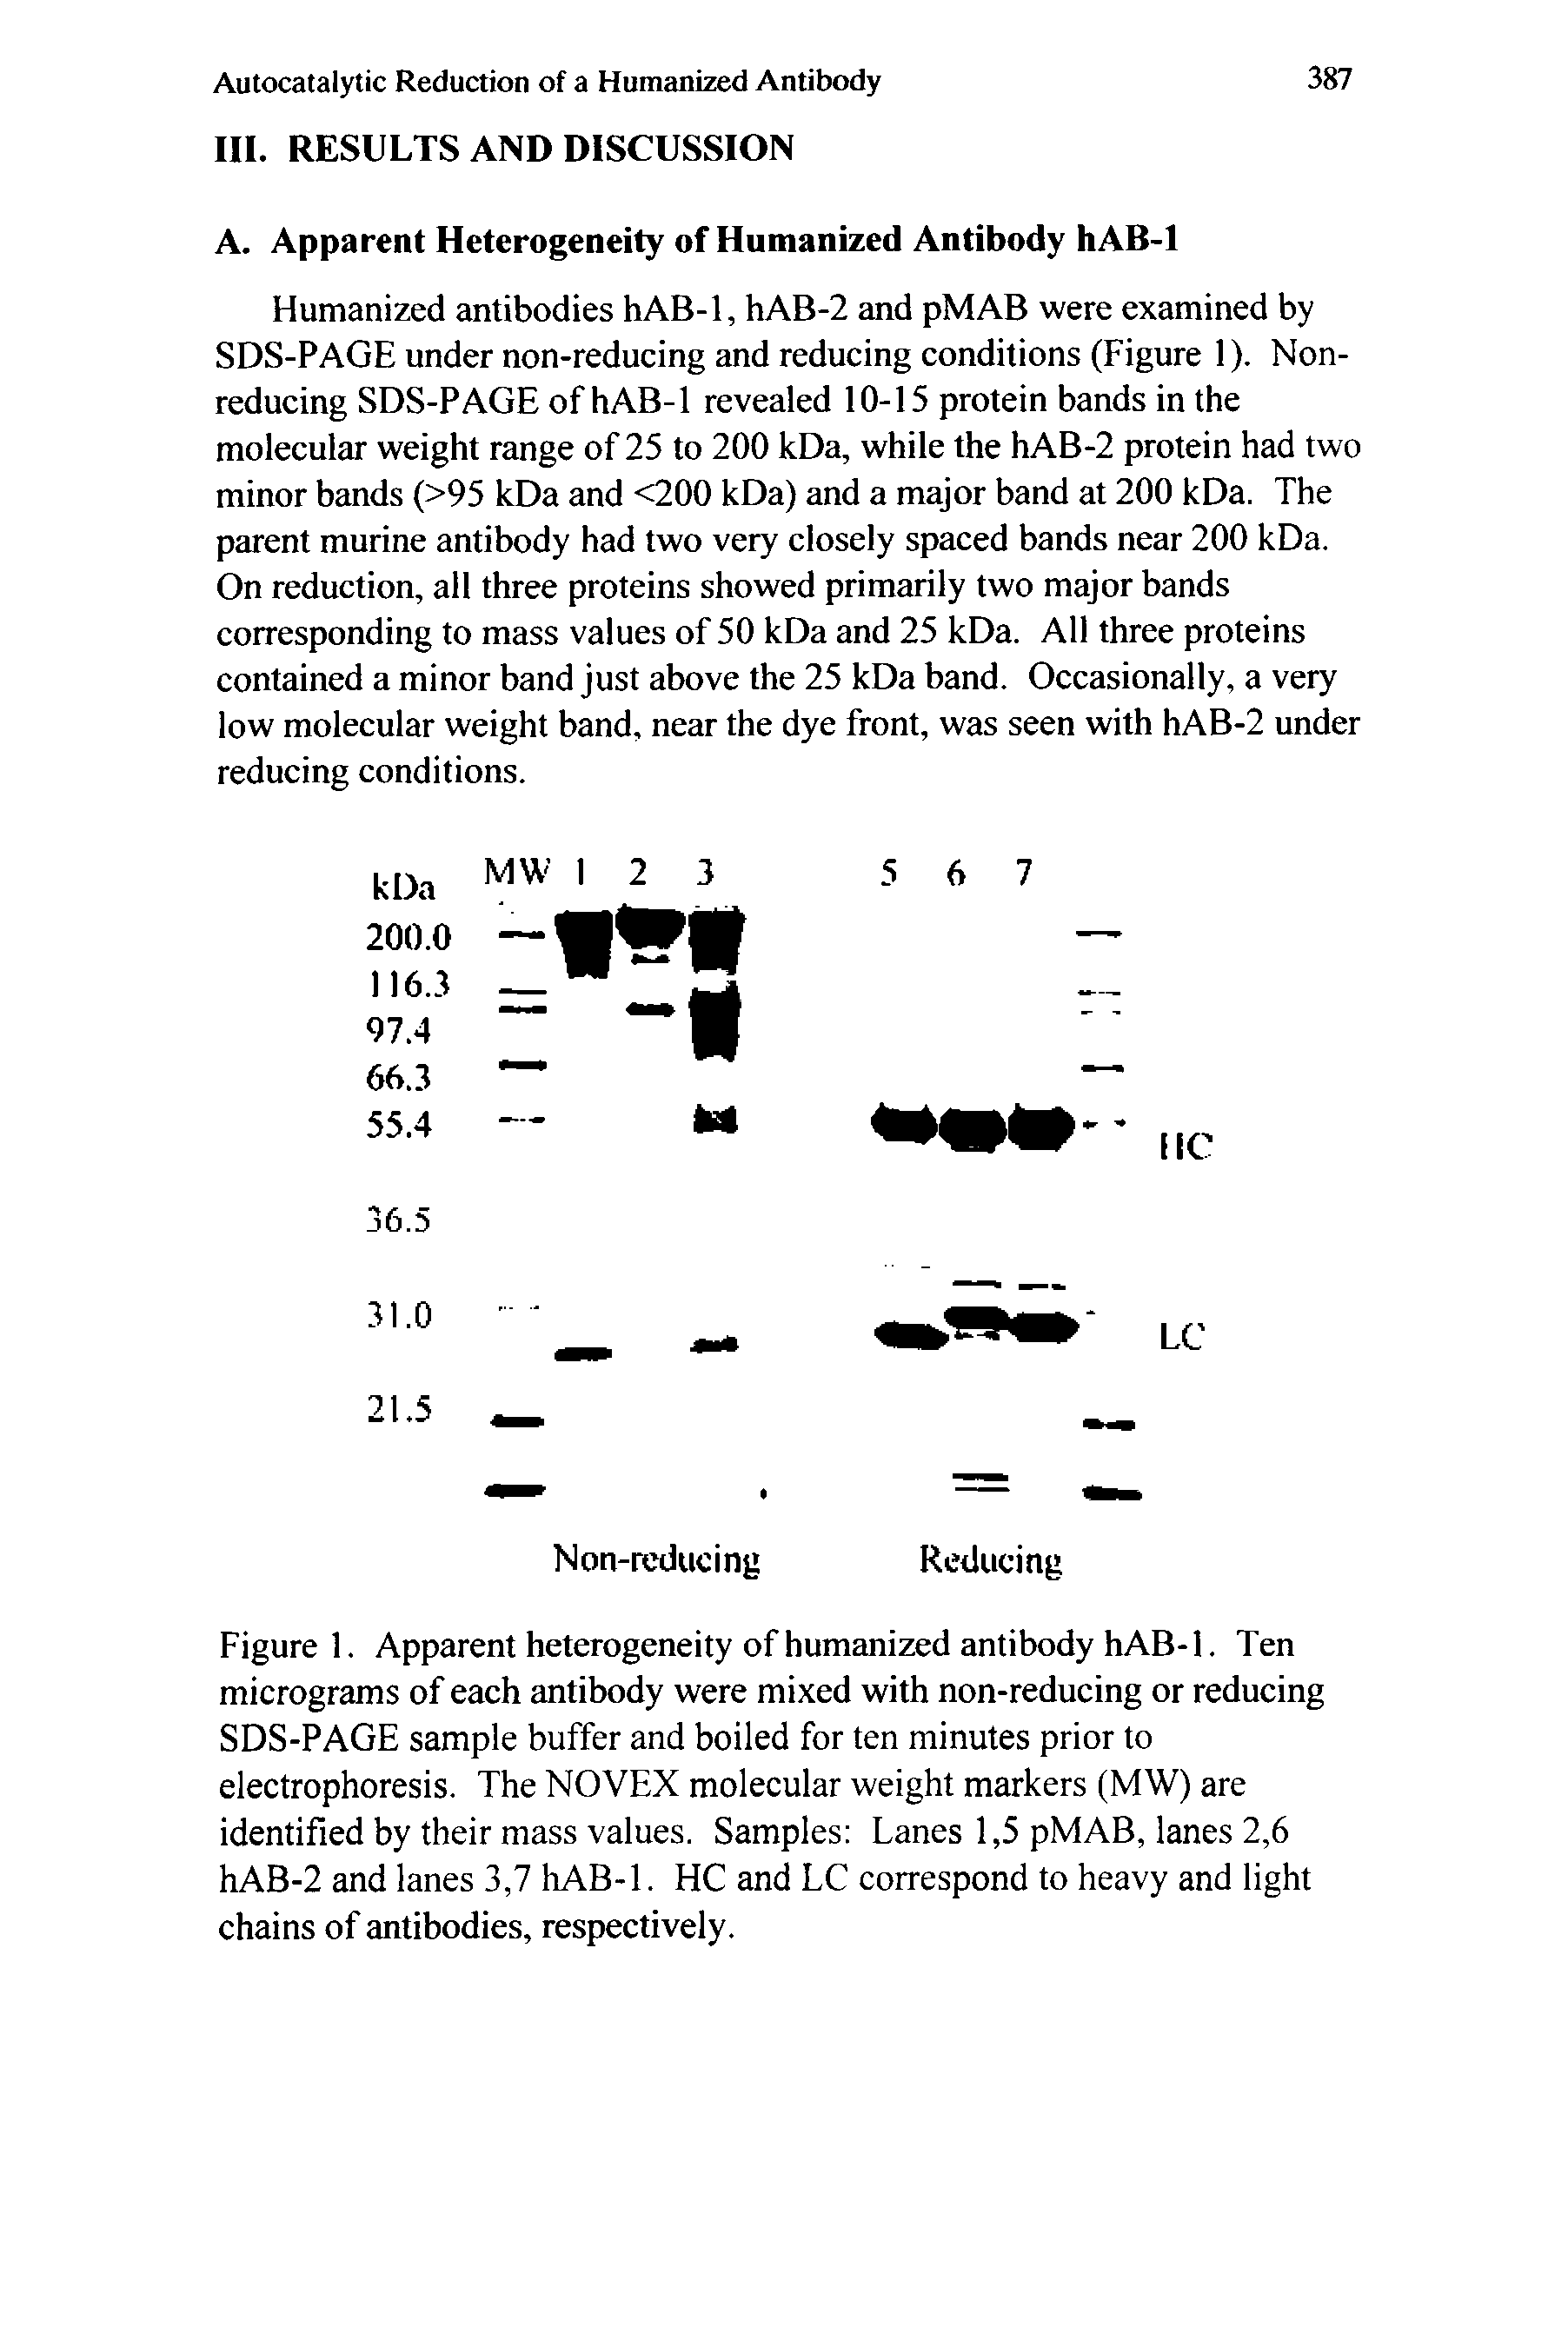 Figure 1. Apparent heterogeneity of humanized antibody hAB-1. Ten micrograms of each antibody were mixed with non-reducing or reducing SDS-PAGE sample buffer and boiled for ten minutes prior to electrophoresis. The NOVEX molecular weight markers (MW) are identified by their mass values. Samples Lanes 1,5 pMAB, lanes 2,6 hAB-2 and lanes 3,7 hAB-1. HC and LC correspond to heavy and light chains of antibodies, respectively.